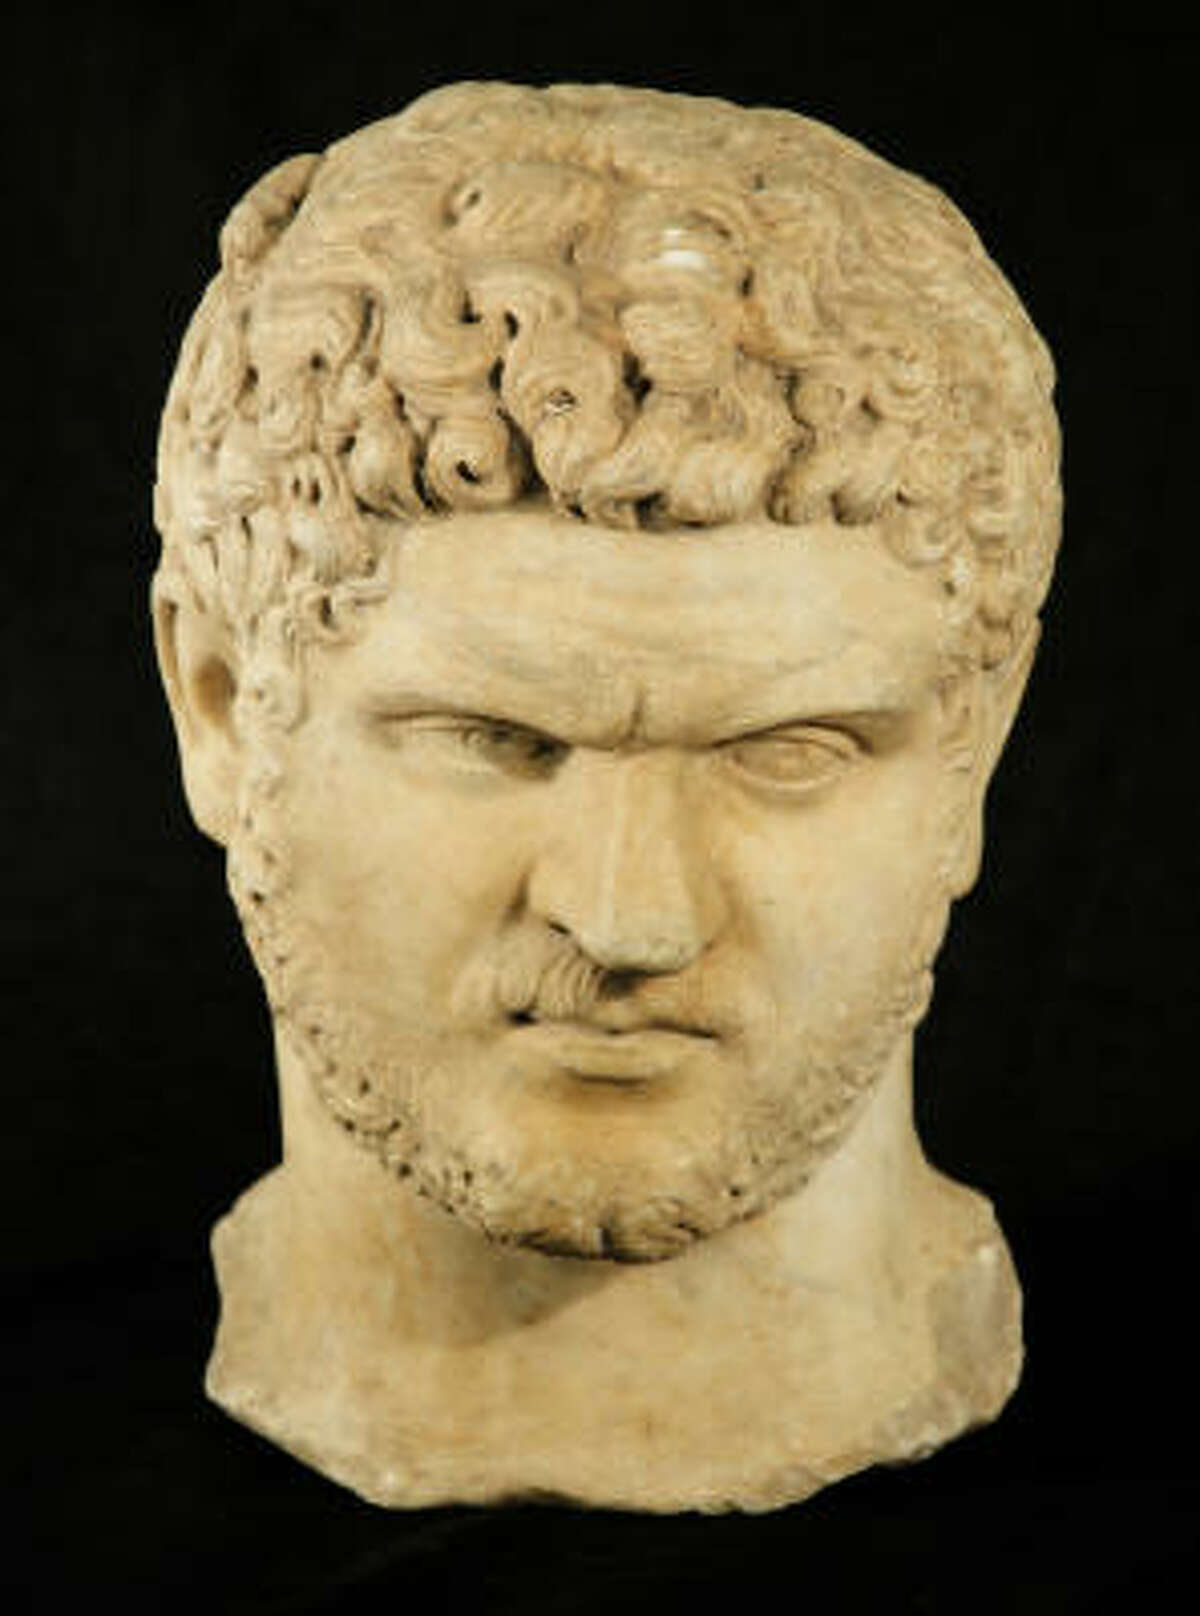 Roy Hofheinz bought the bust of Roman Emperor Caracalla about 50 years ago.